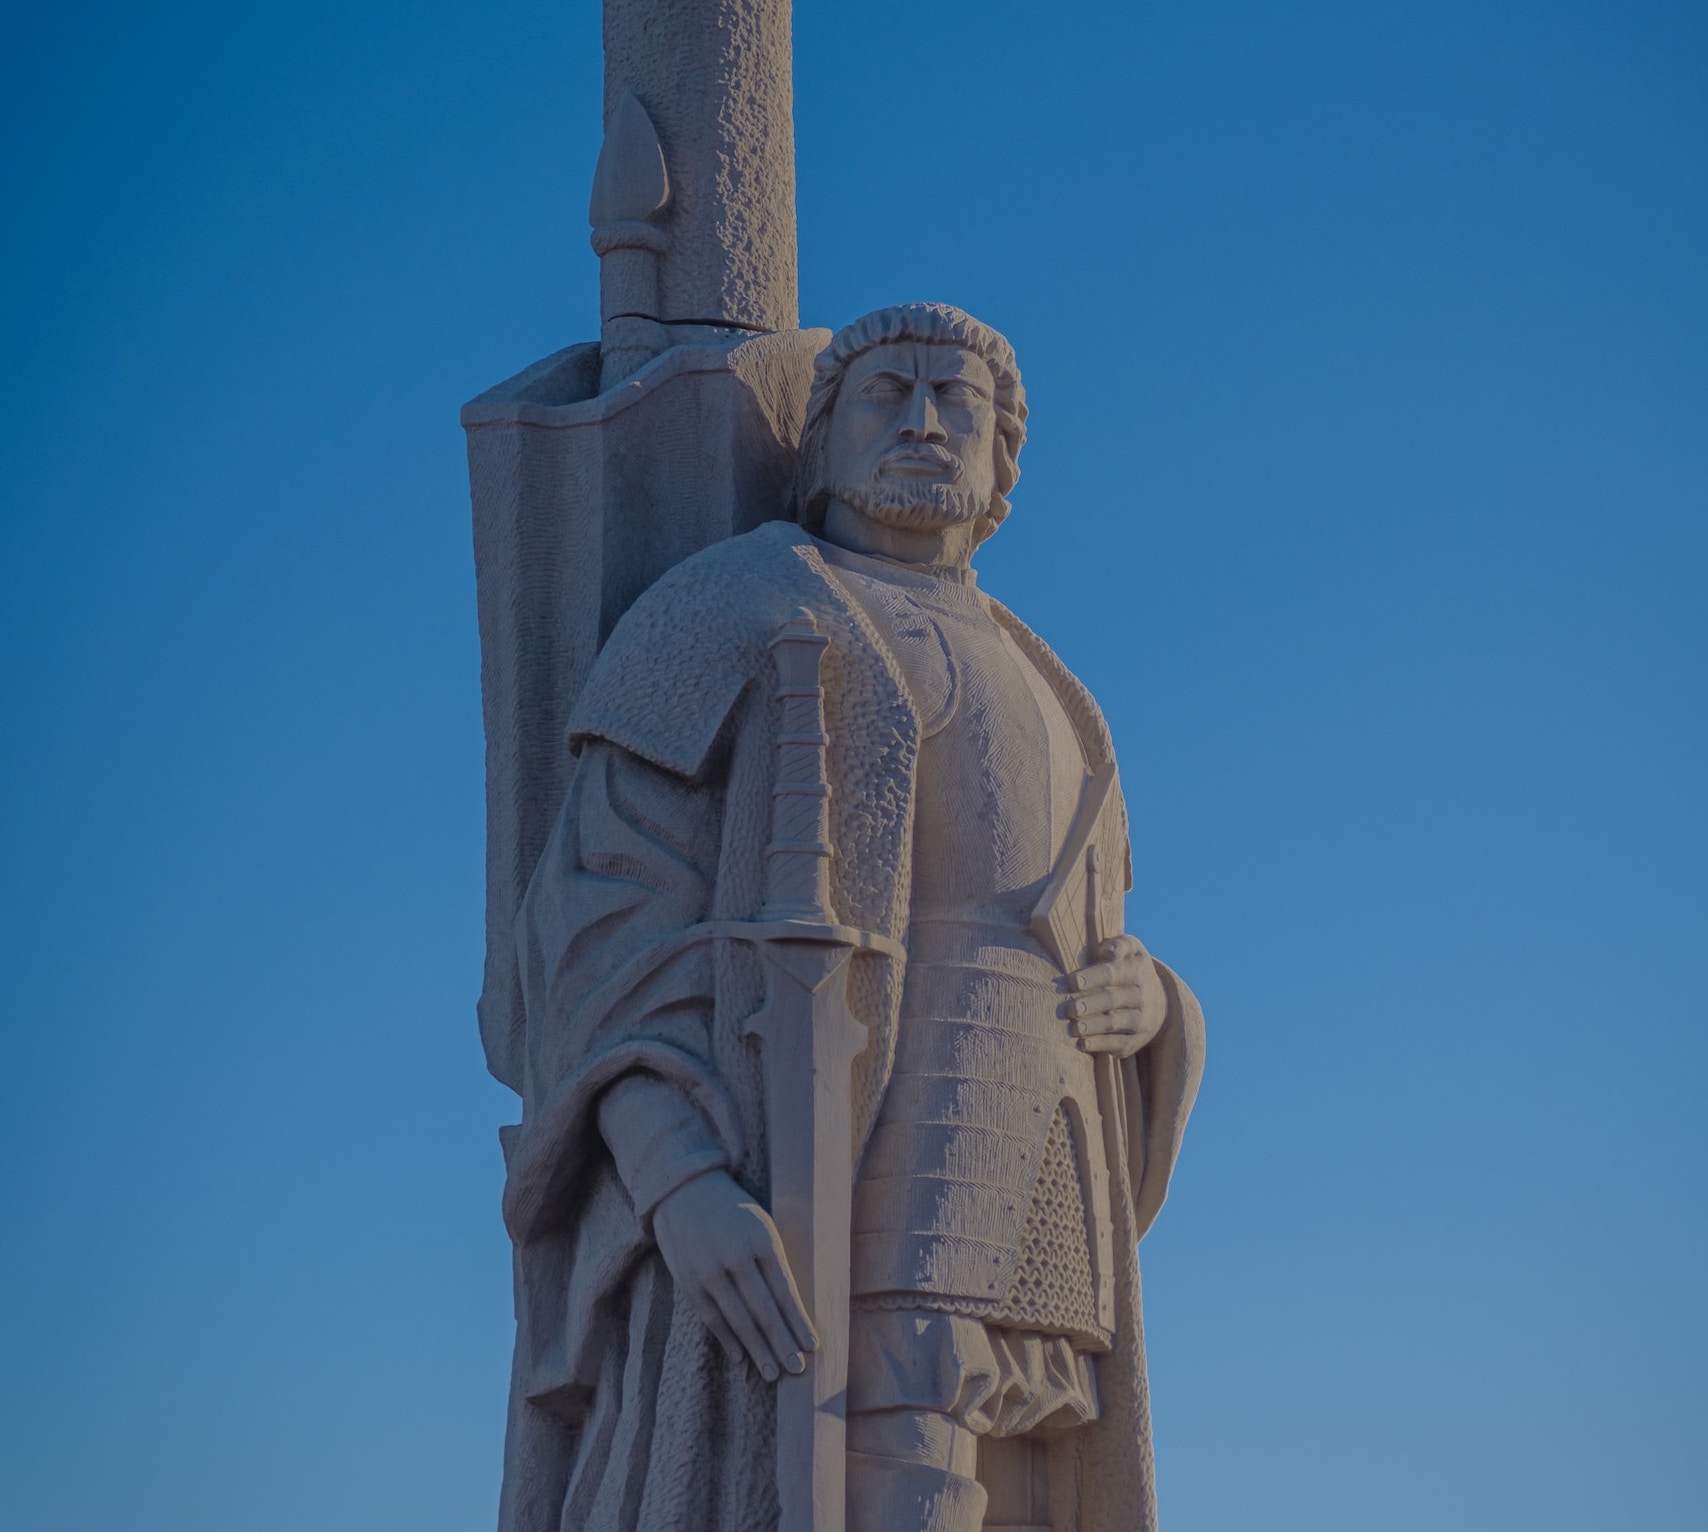 Statue at Cabrillo National Monument